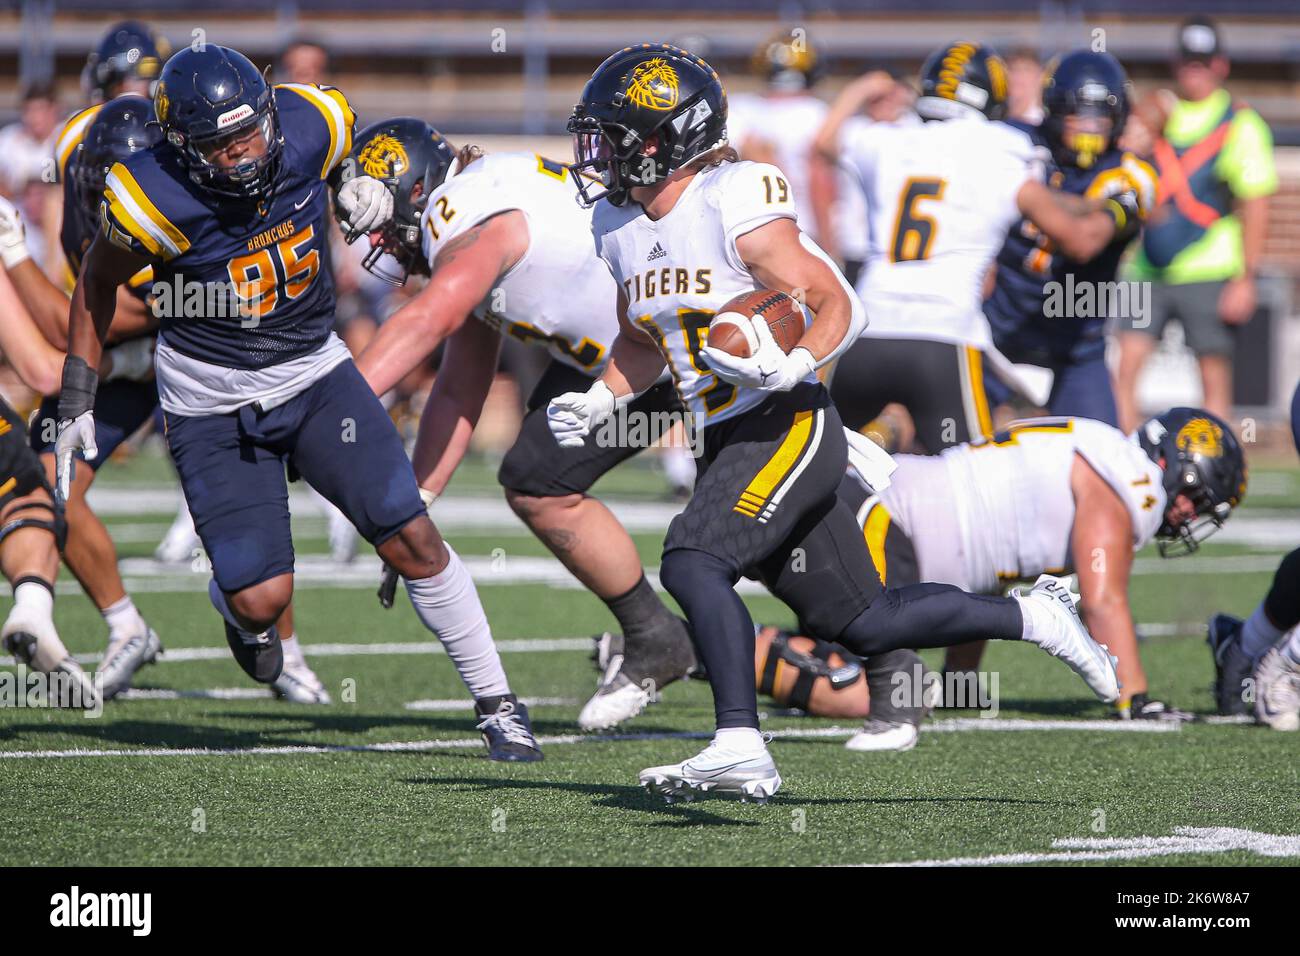 Edmond, OK, USA. 15th Oct, 2022. Ft Hays State University Tigers wide receiver Trevor Watts (19) runs with the ball during the NCAA football game between the Fort Hayes State University Tigers and the University of Central Oklahoma Broncos at Chad Richison Stadium in Edmond, OK. Ron Lane/CSM/Alamy Live News Stock Photo